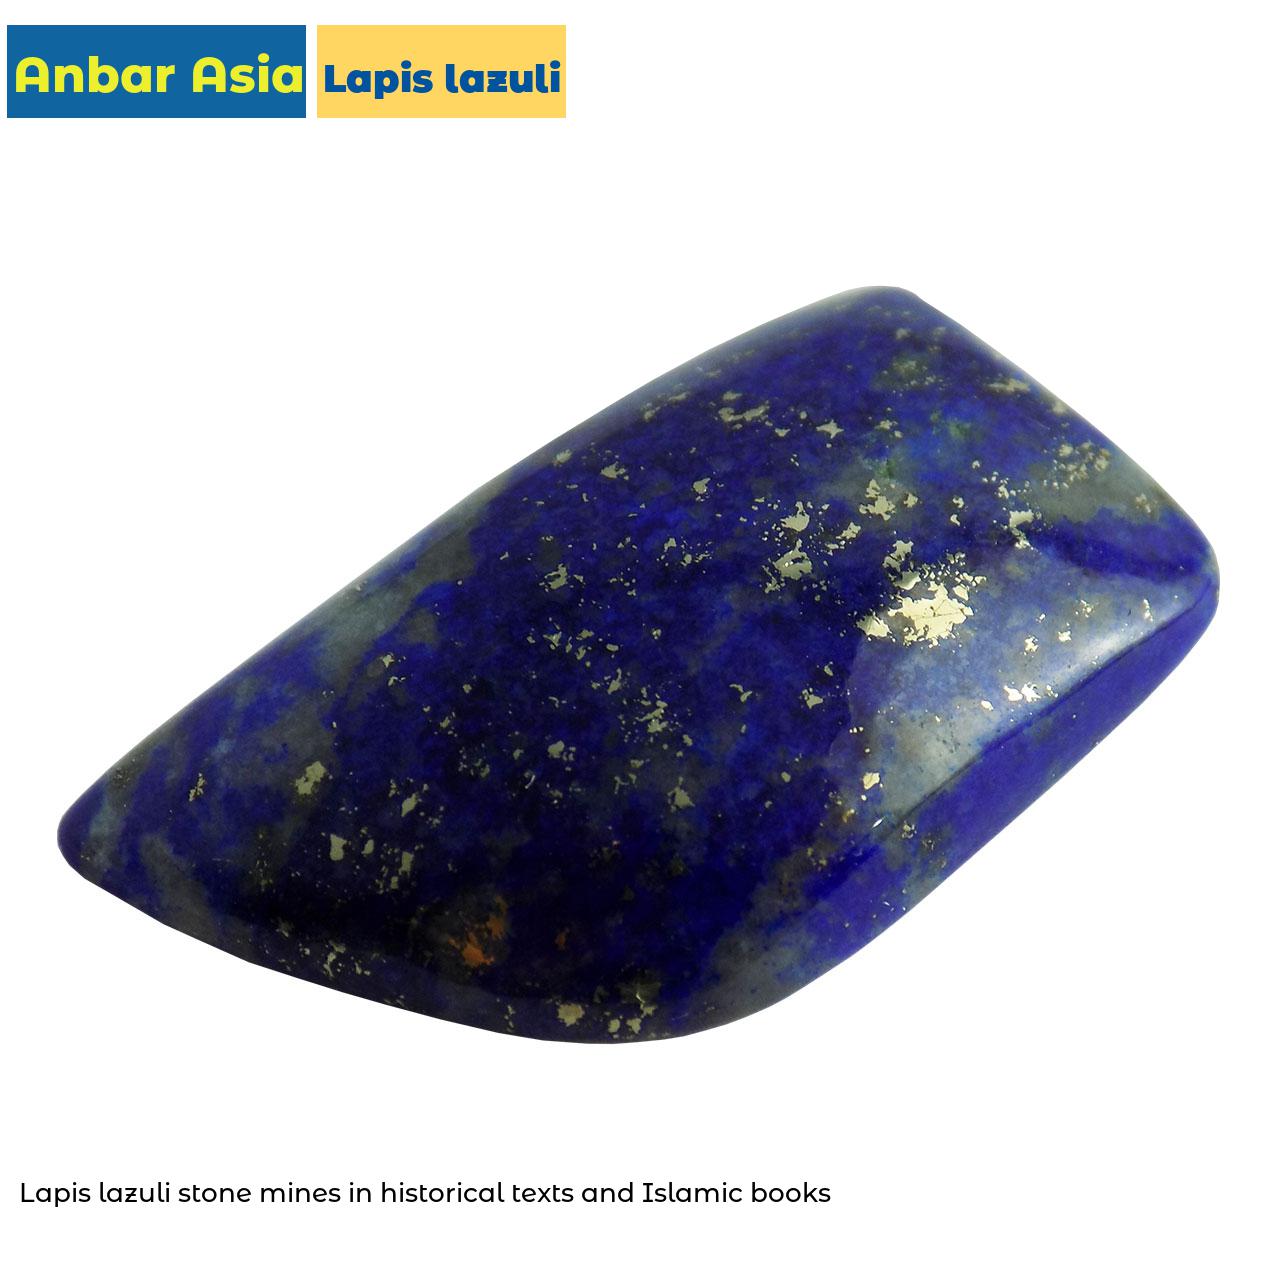 Lapis lazuli stone mines in historical texts and Islamic books